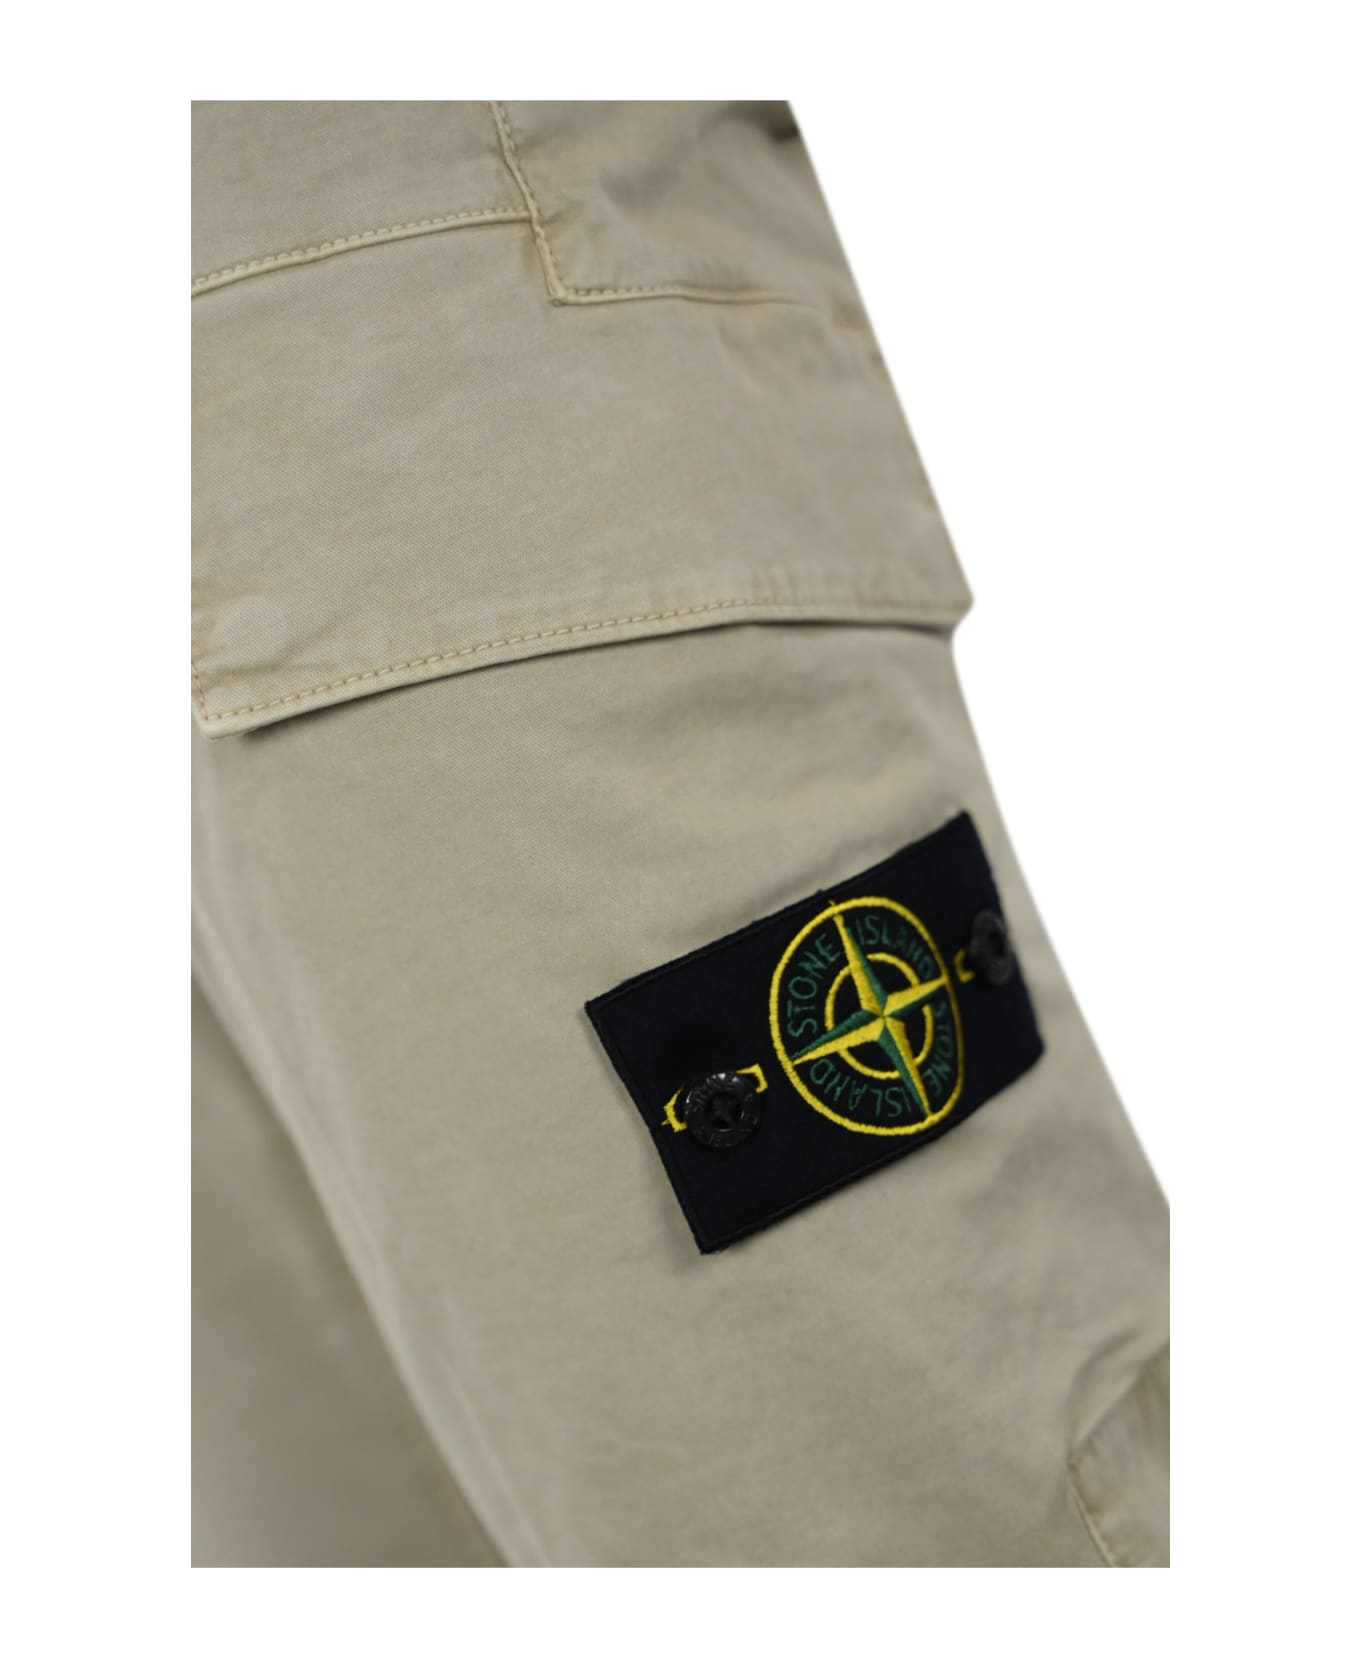 Stone Island Cargo Trousers 30604 Old Treatment - SAND ボトムス